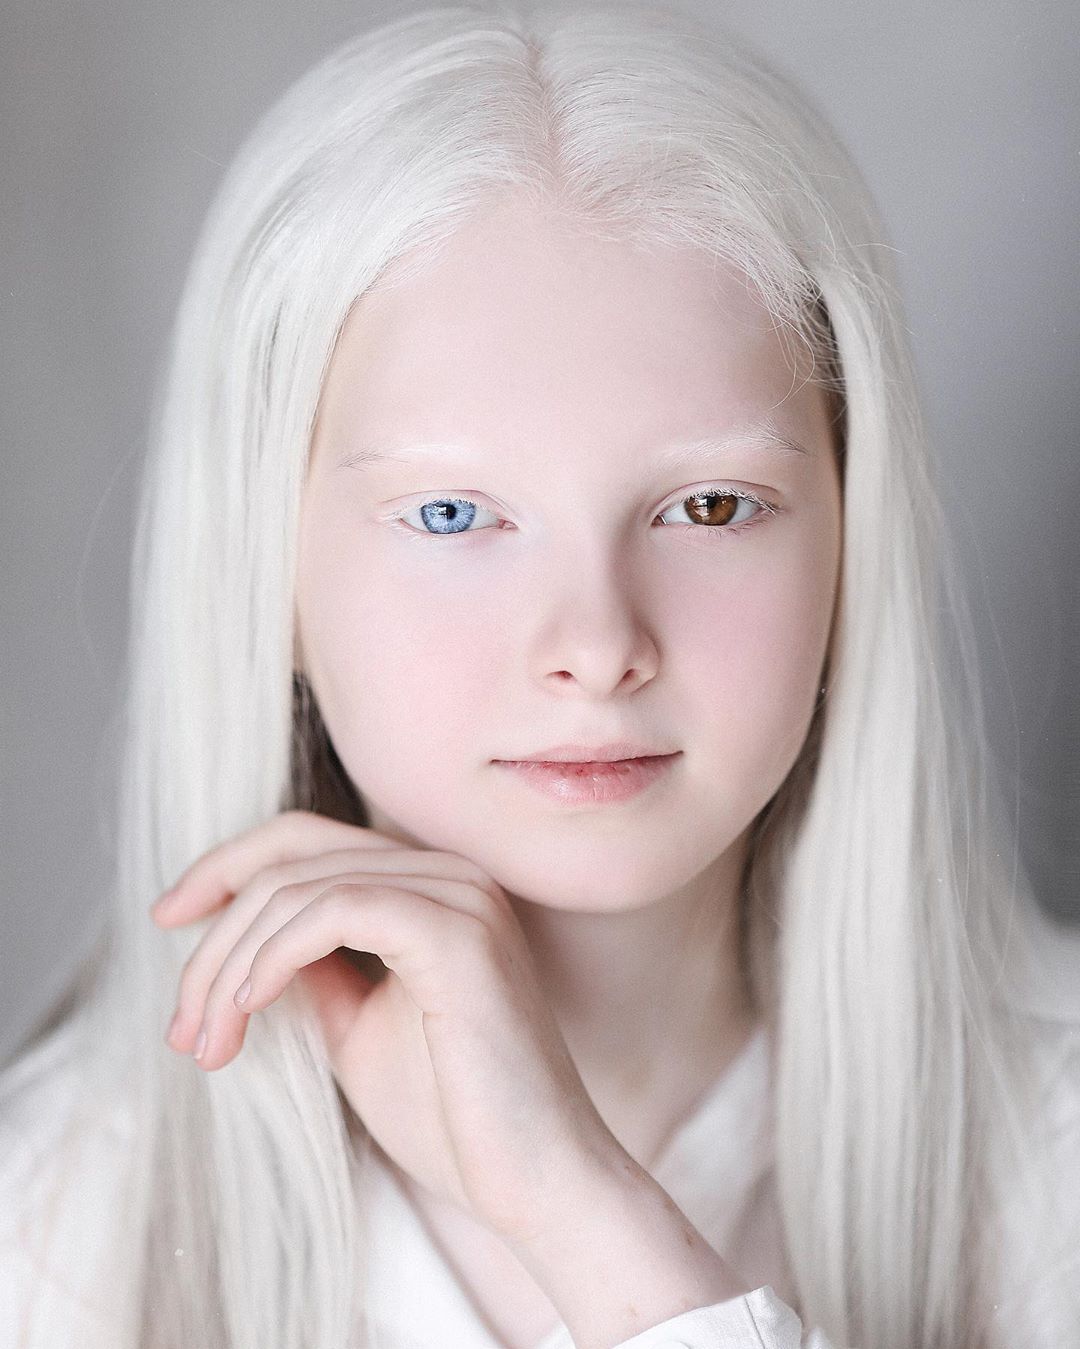 Amina Ependieva – A Girl Who Inherited Two Genetic Mutations And Exceptional Beauty